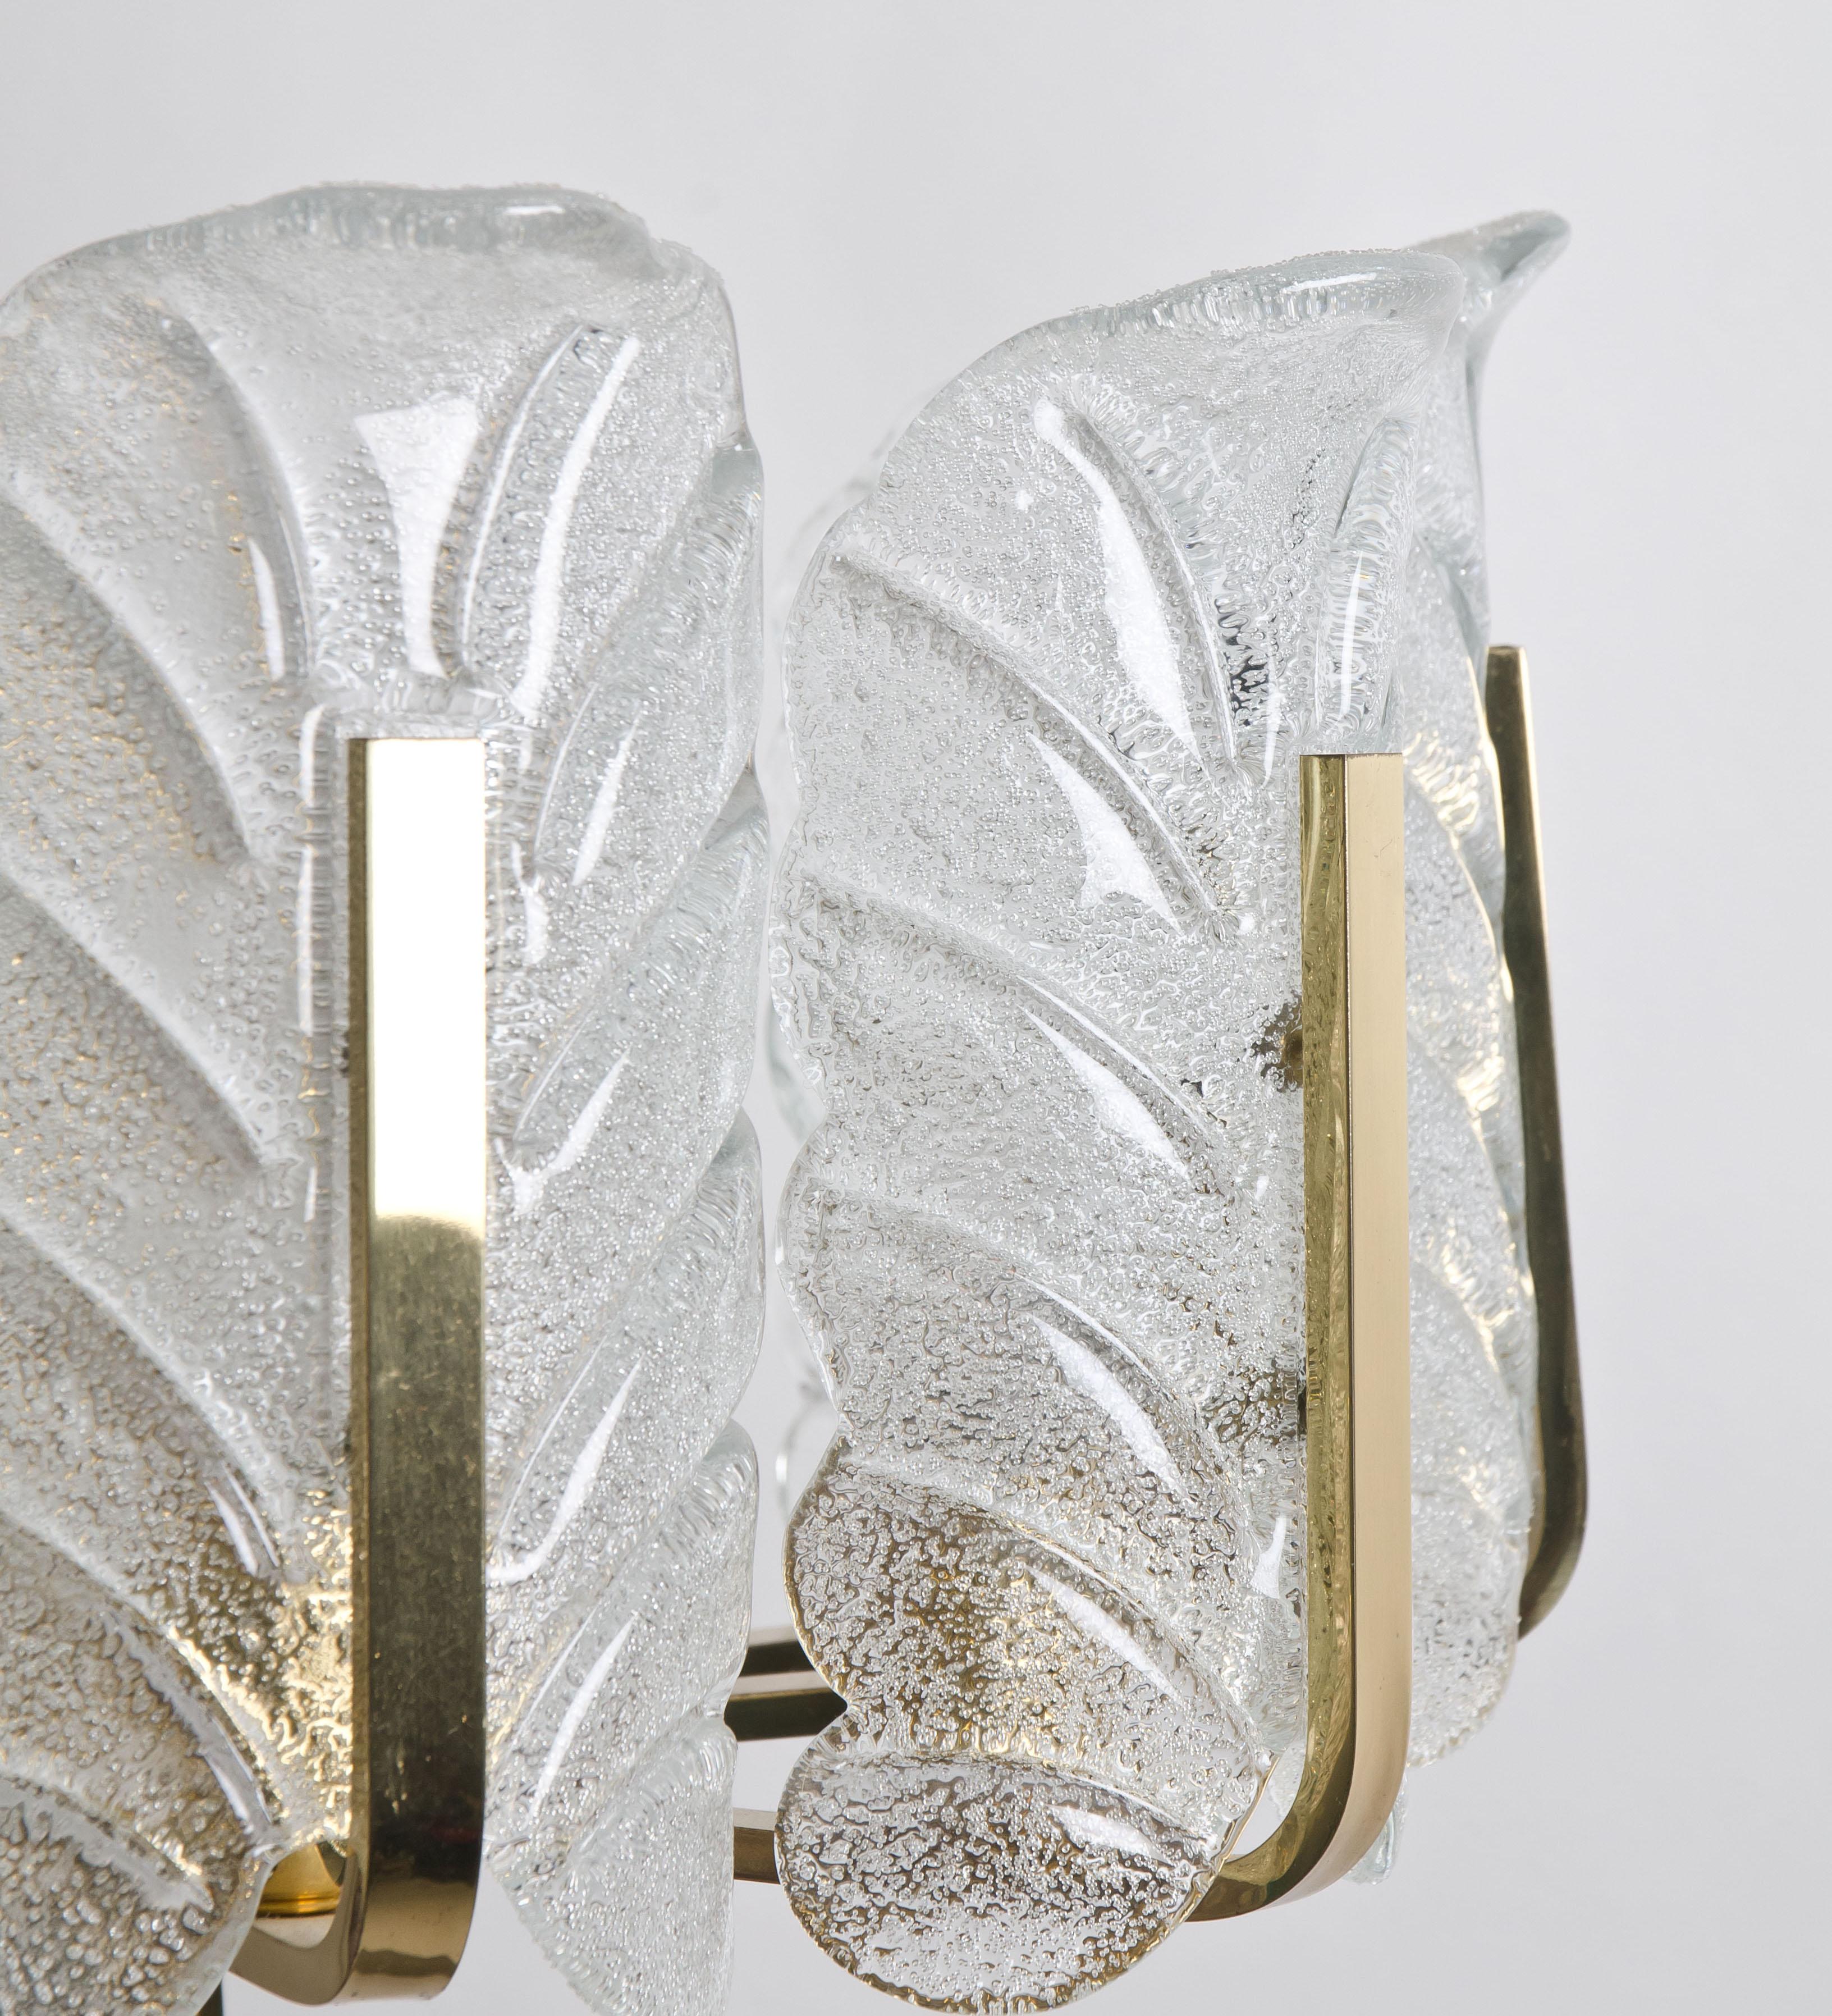 et of Four Leaves Brass Light Fixtures by Fagerlund for Orrefors, 1960s, Sweden For Sale 1